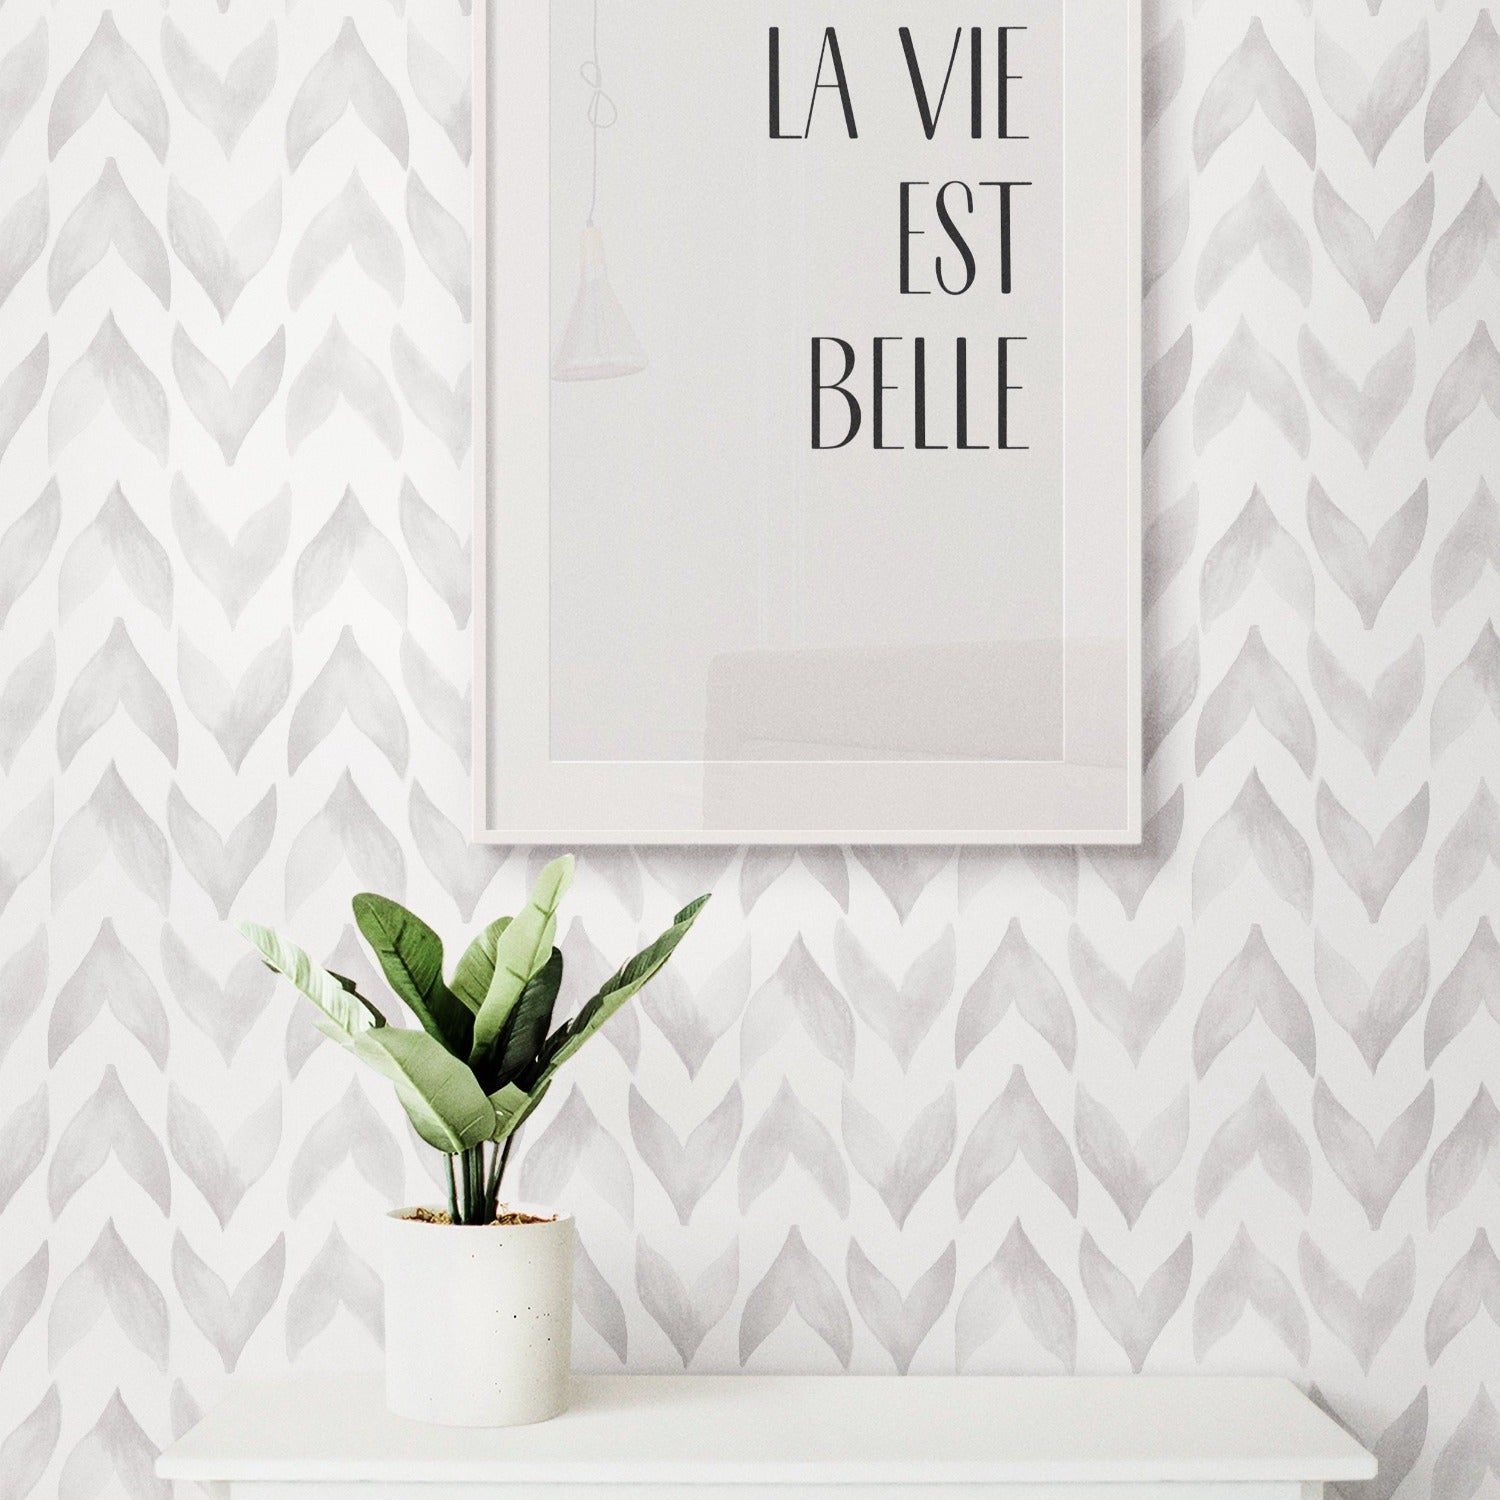 An interior decor scene showing Moroccan Tile Wallpaper applied on a wall, complemented by a framed poster reading 'LA VIE EST BELLE' and a potted plant on a white shelf, suggesting a chic and modern living space.